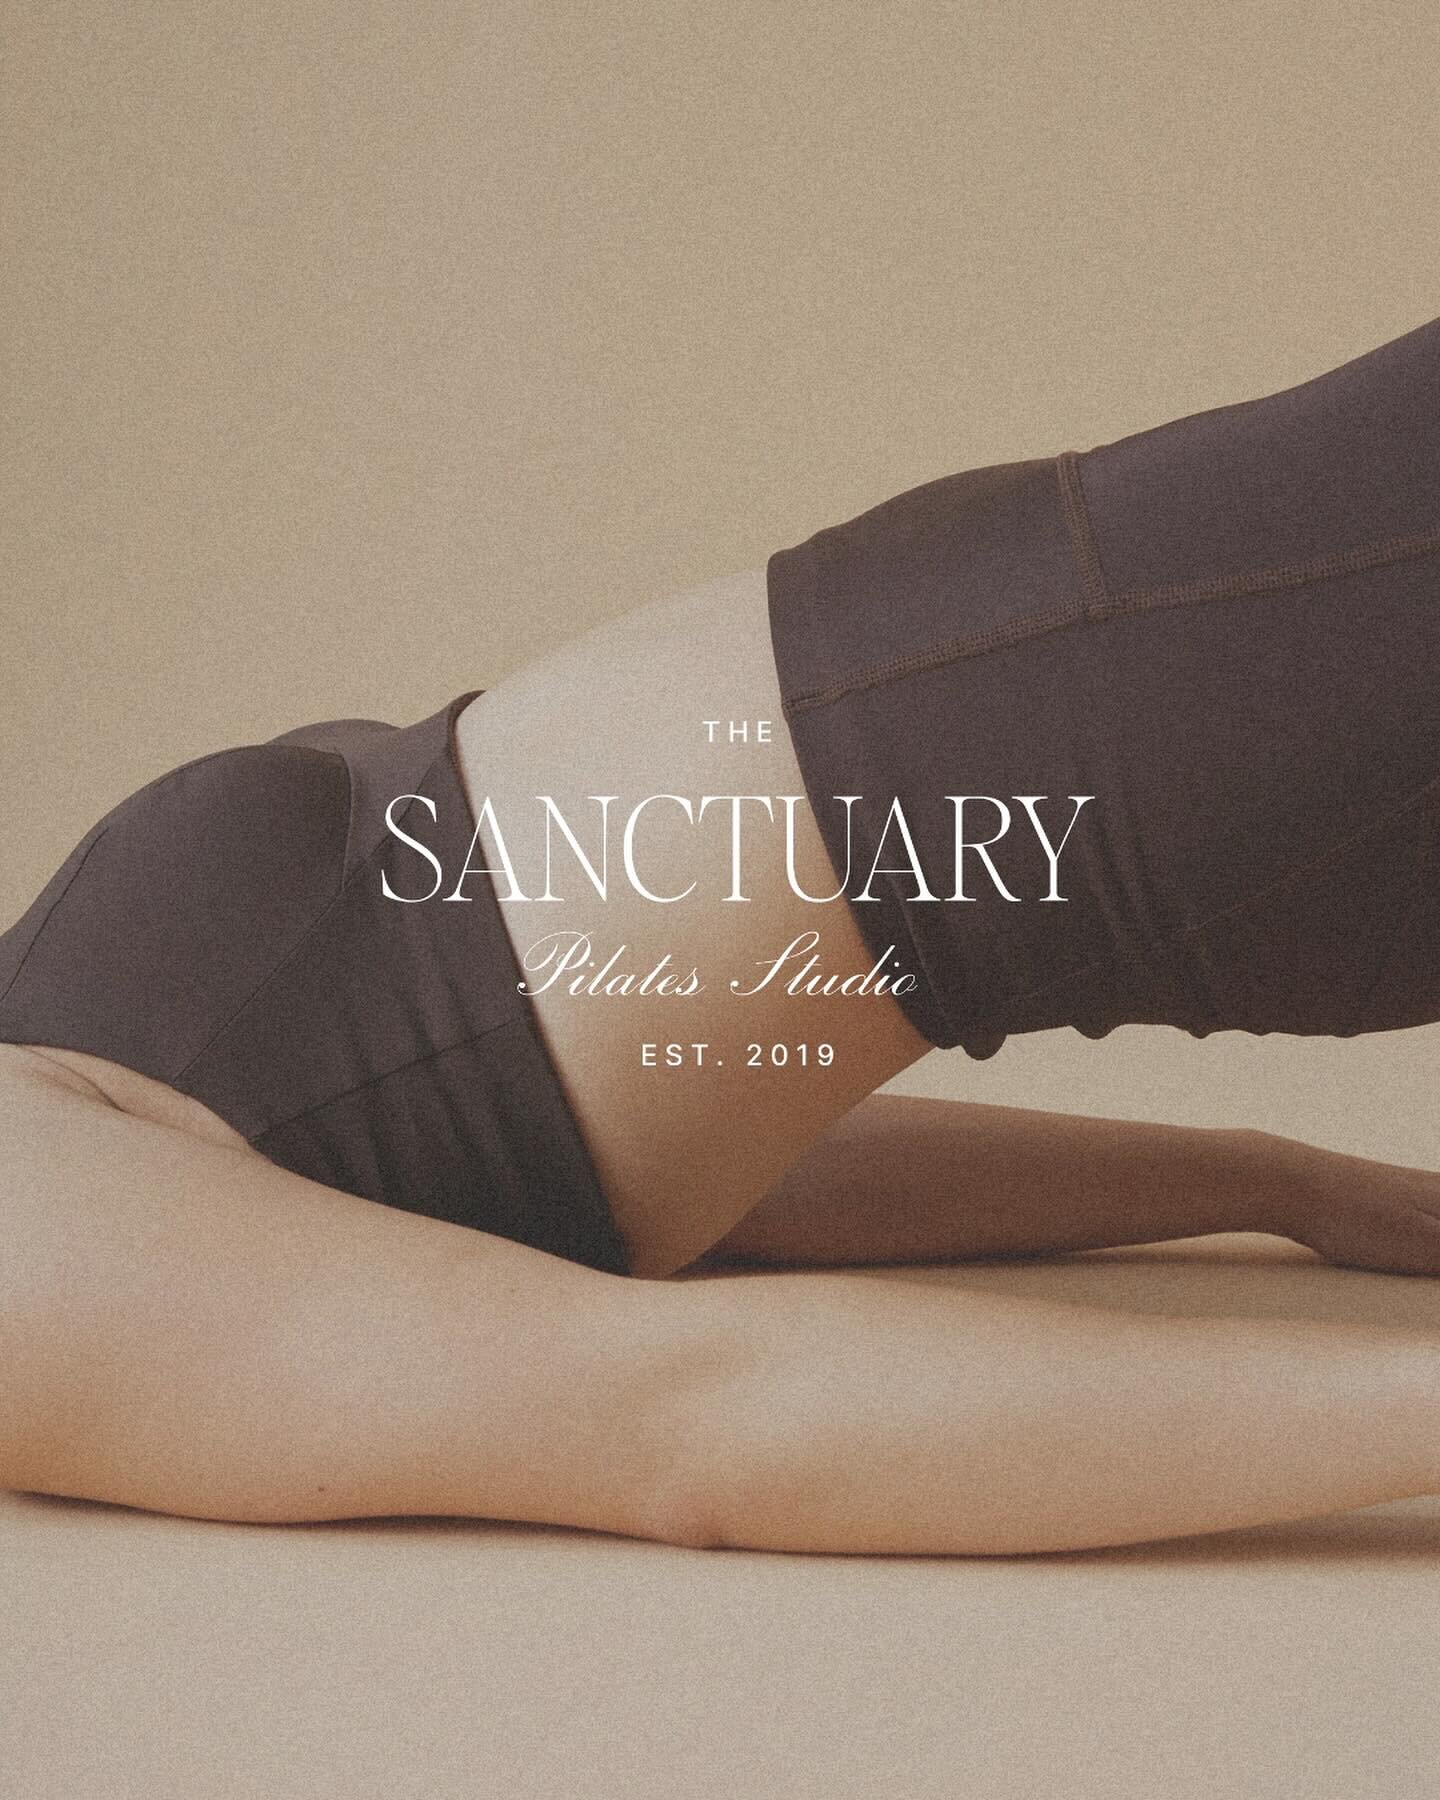 ✨Unveiling some highlights from our latest project for Sanctuary Pilates Studio! 
 With a fusion of timeless Pilates traditions and contemporary innovations, Sanctuary offers a modern sanctuary for wellness enthusiasts. Our aim was to redefine holist